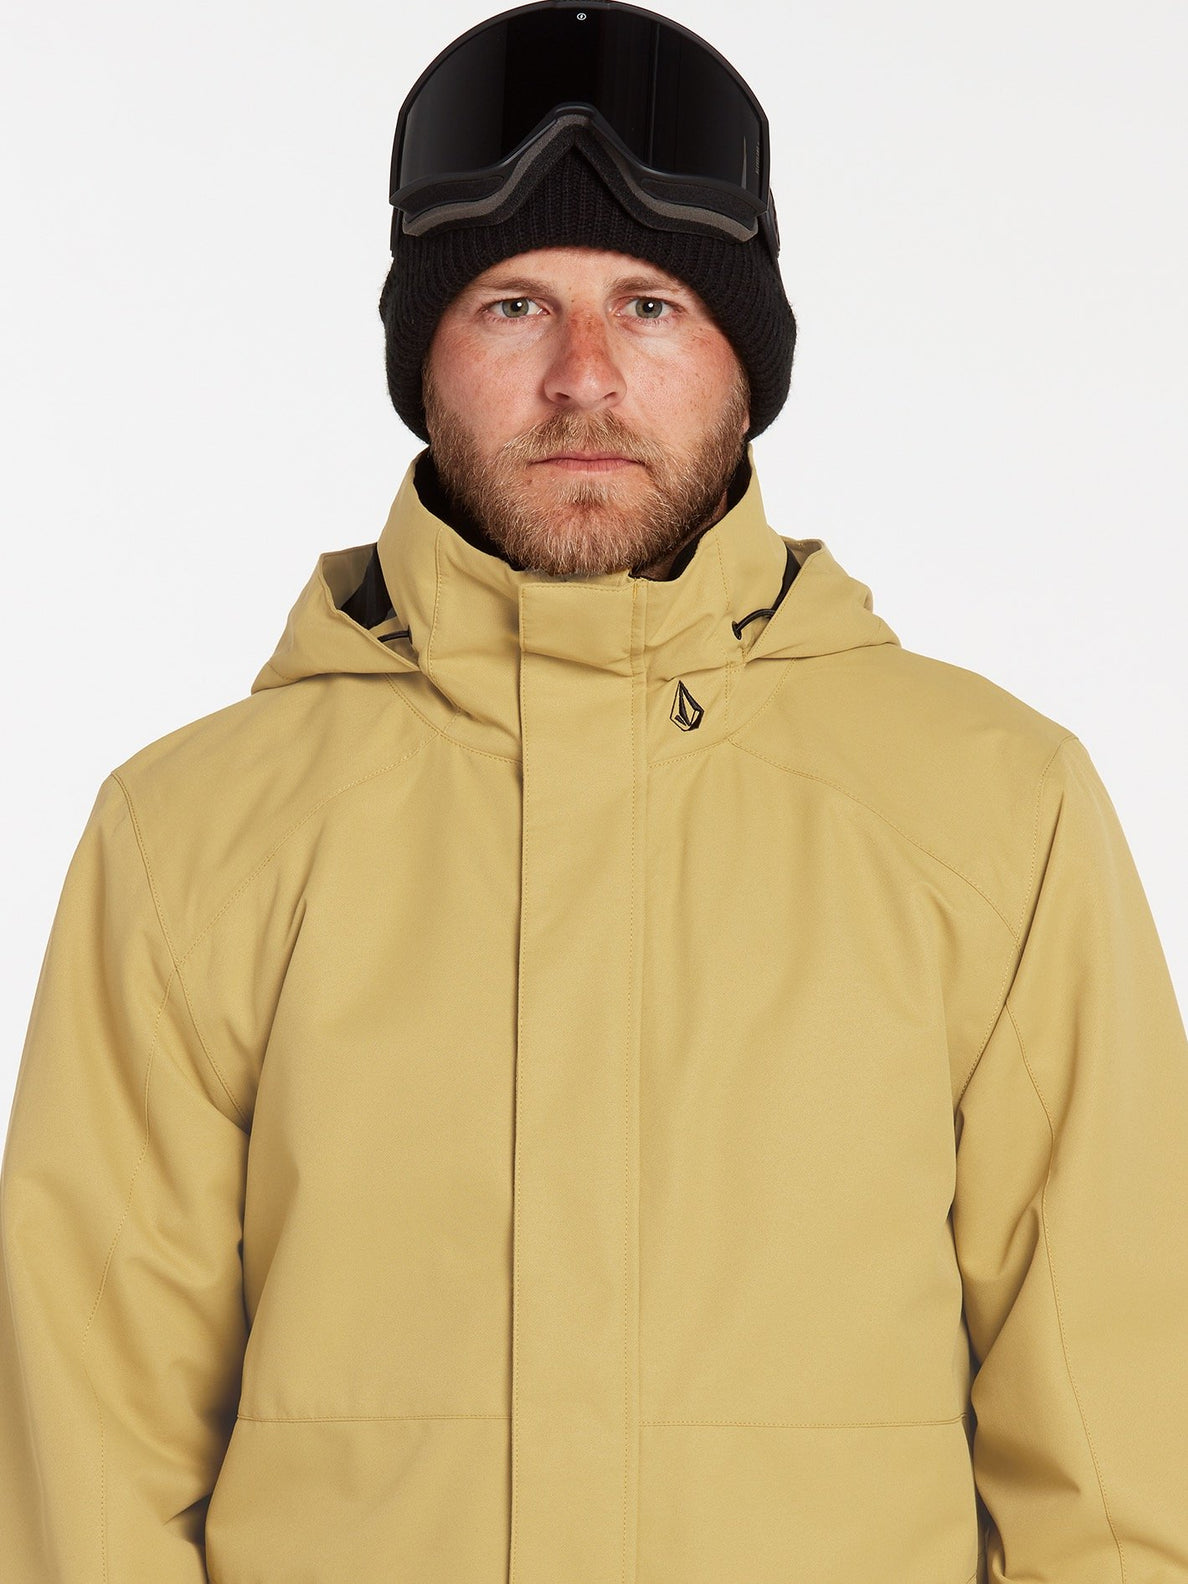 Scortch Insulated Jacket - MULTI (G0452208_MLT) [42]